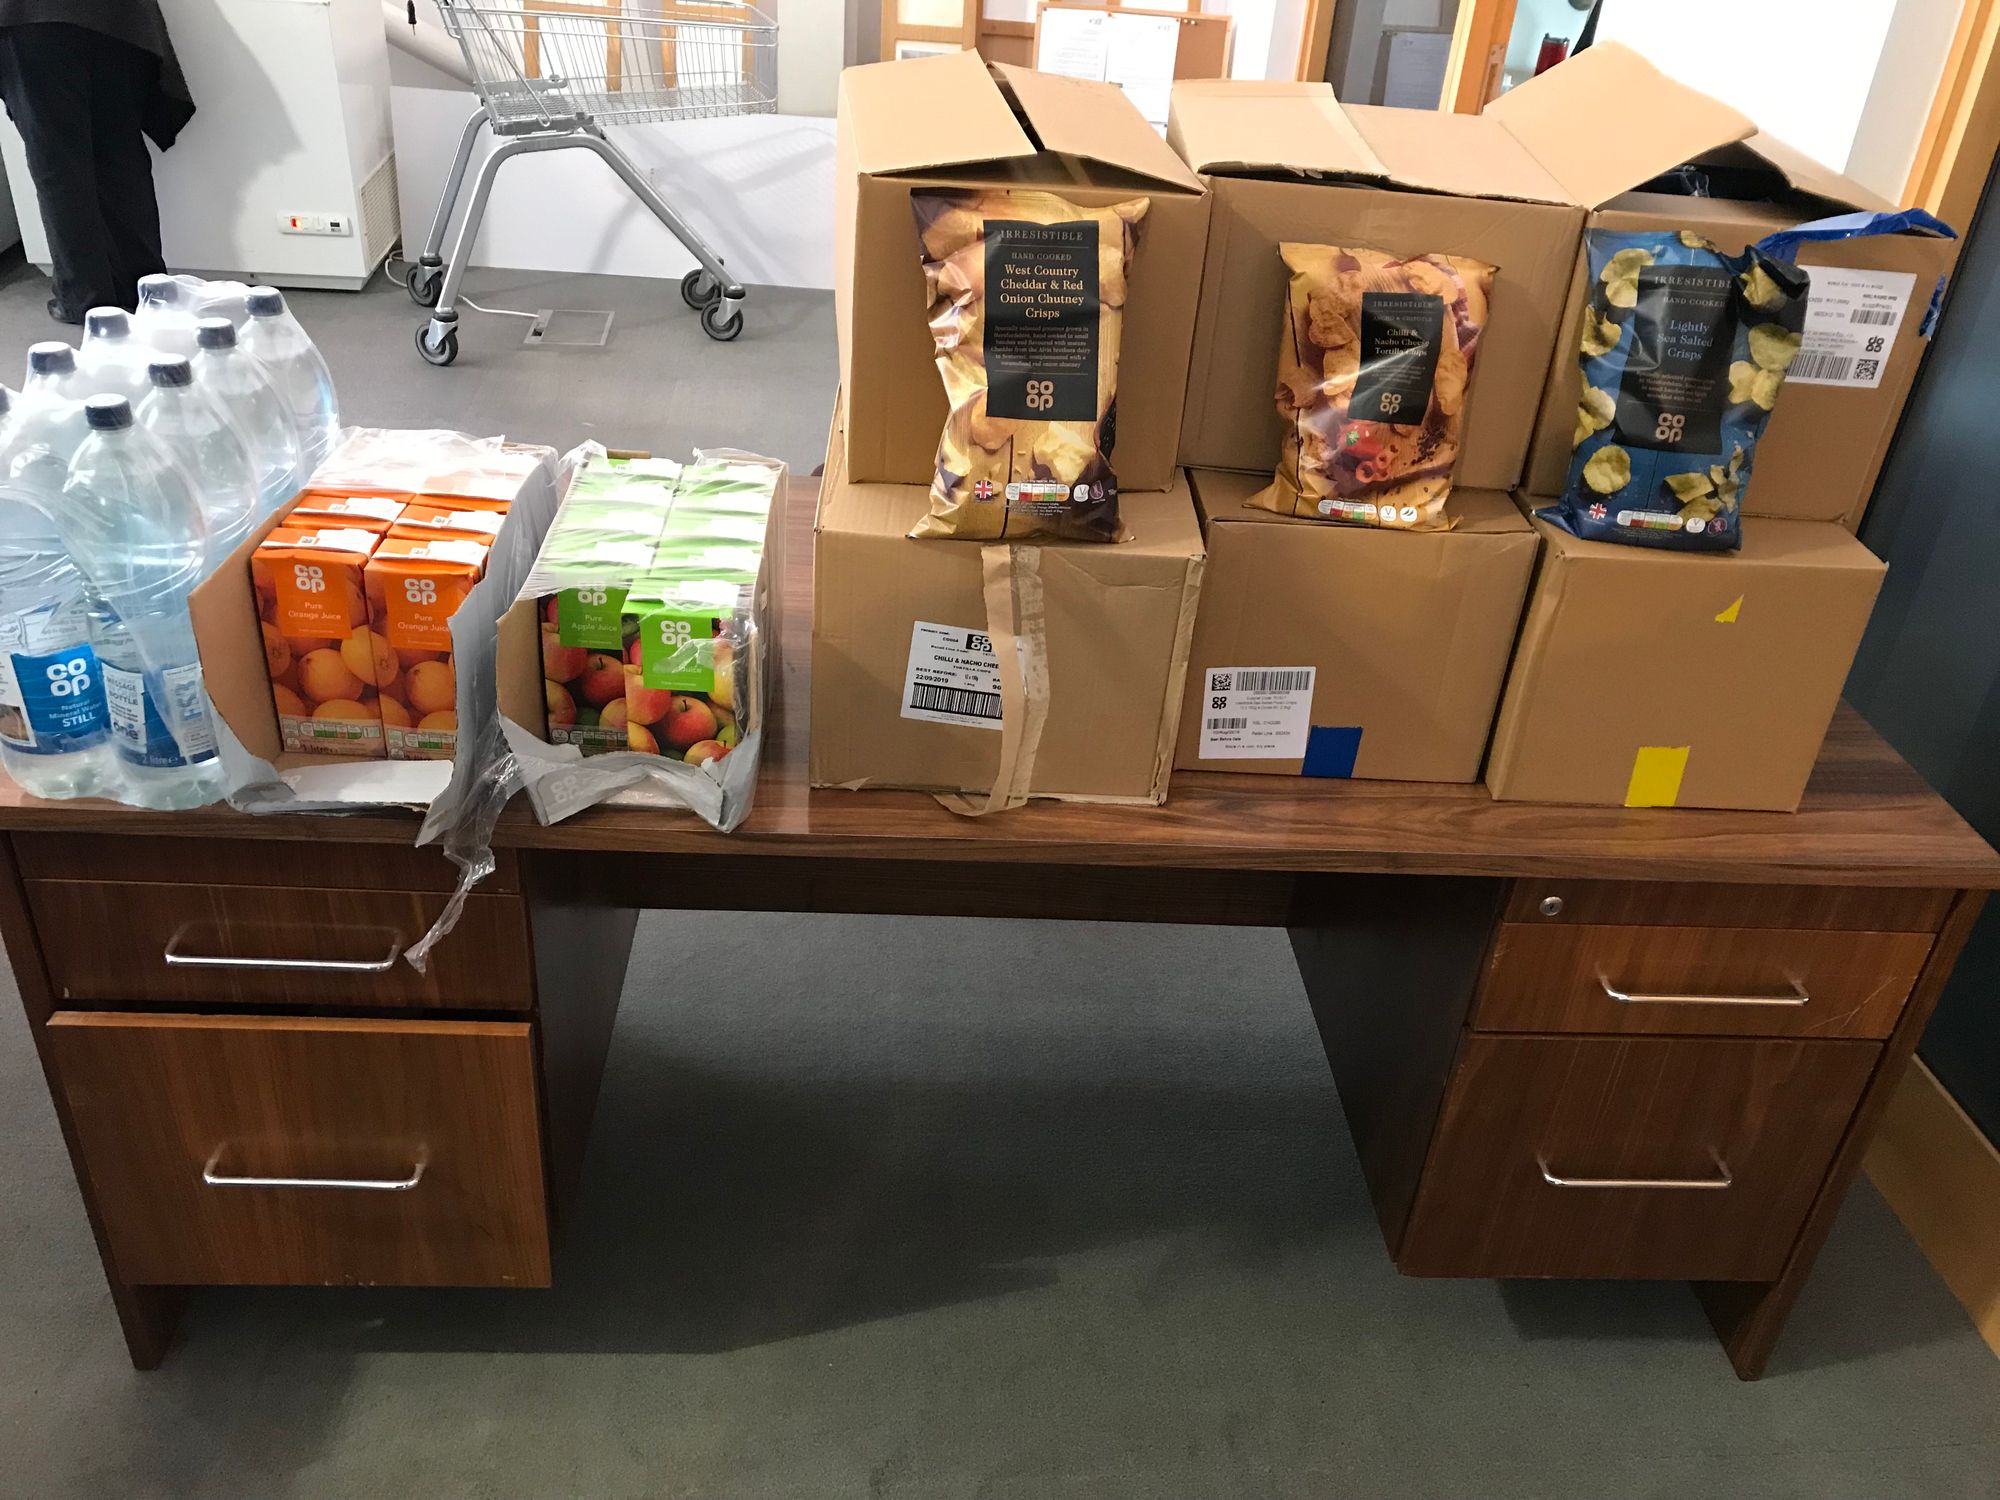 Excess food from meetings donated to local food bank